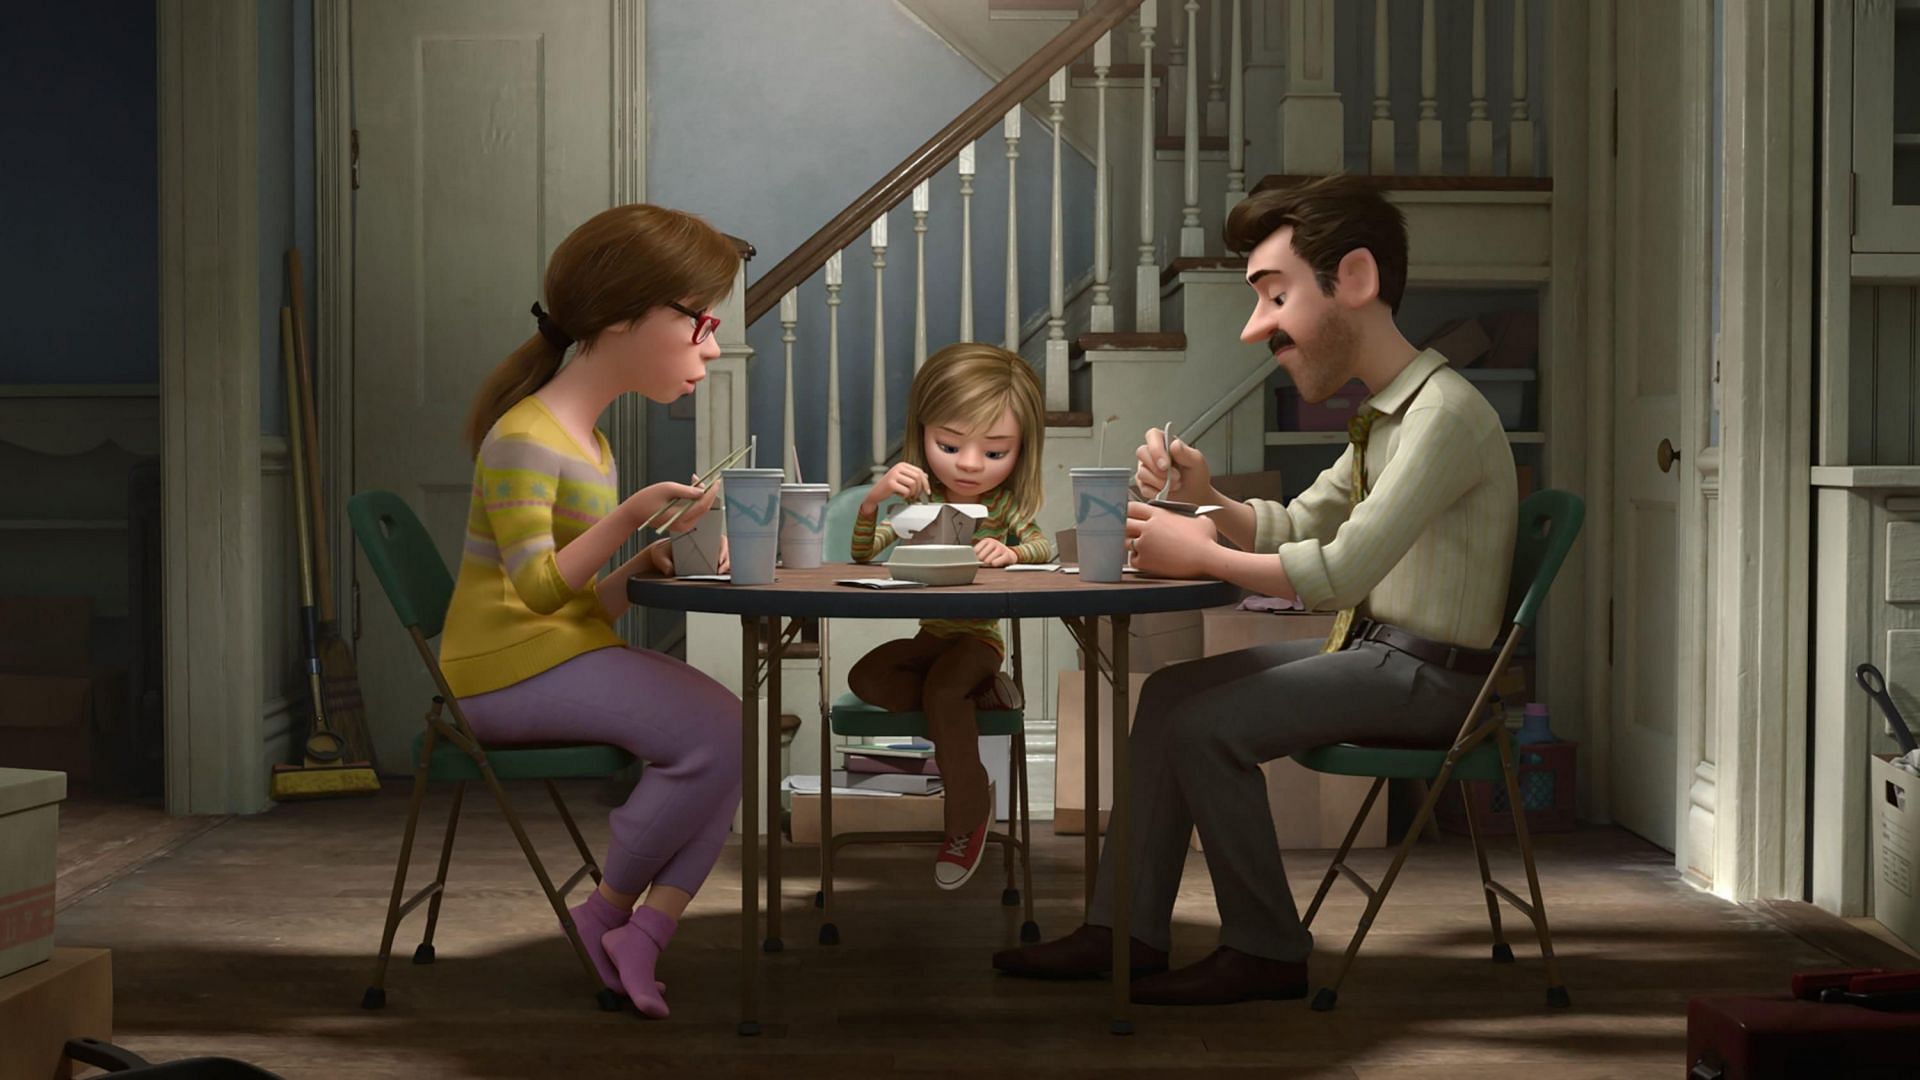 A still from Inside Out (Image via Pixar)